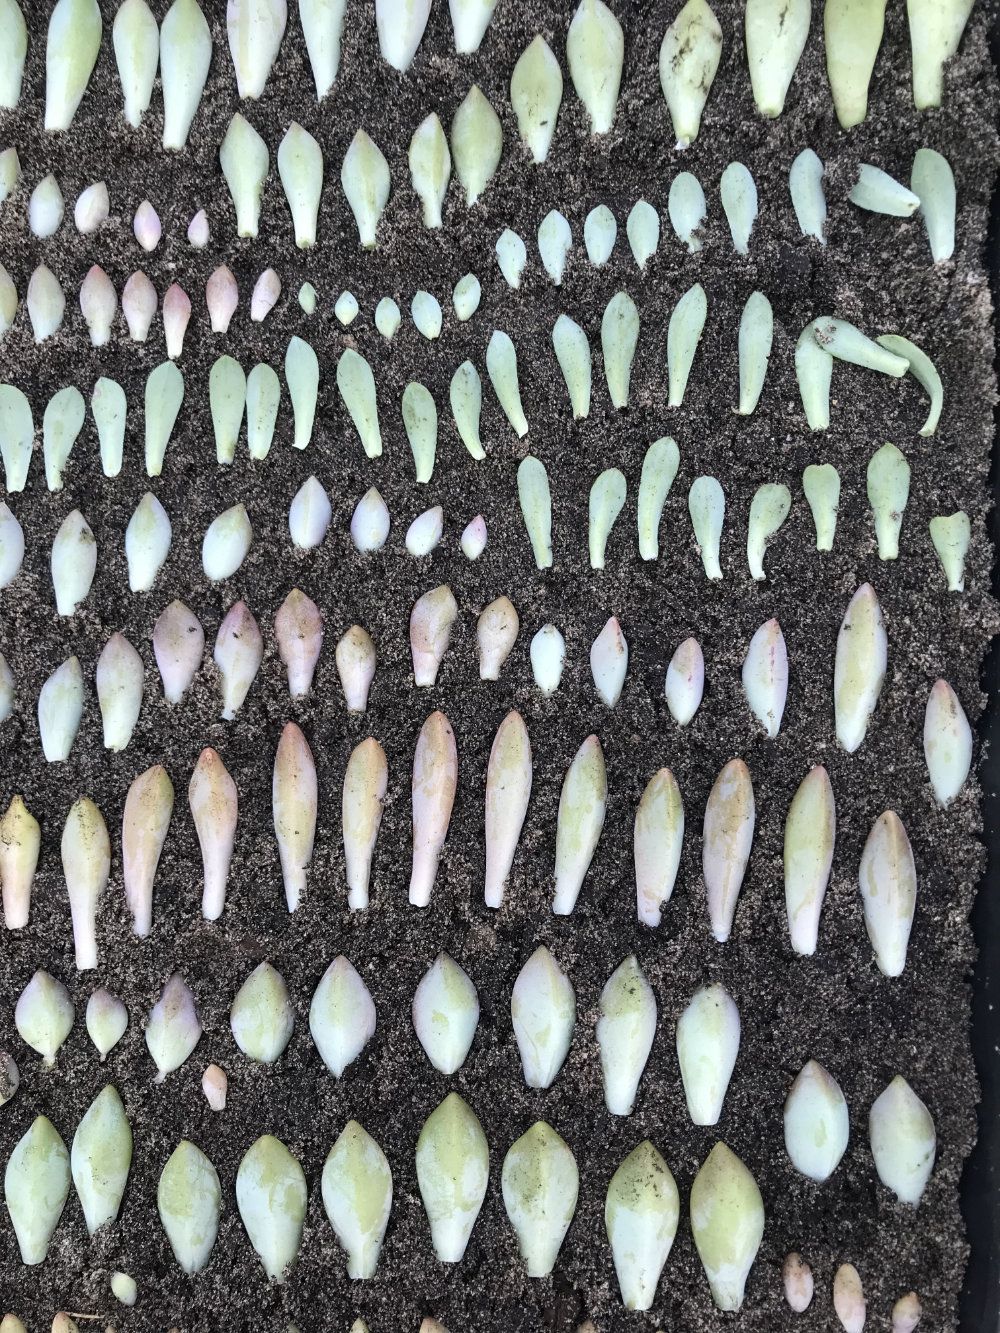 Succulent leaves lined up ready to take root in the dirt.